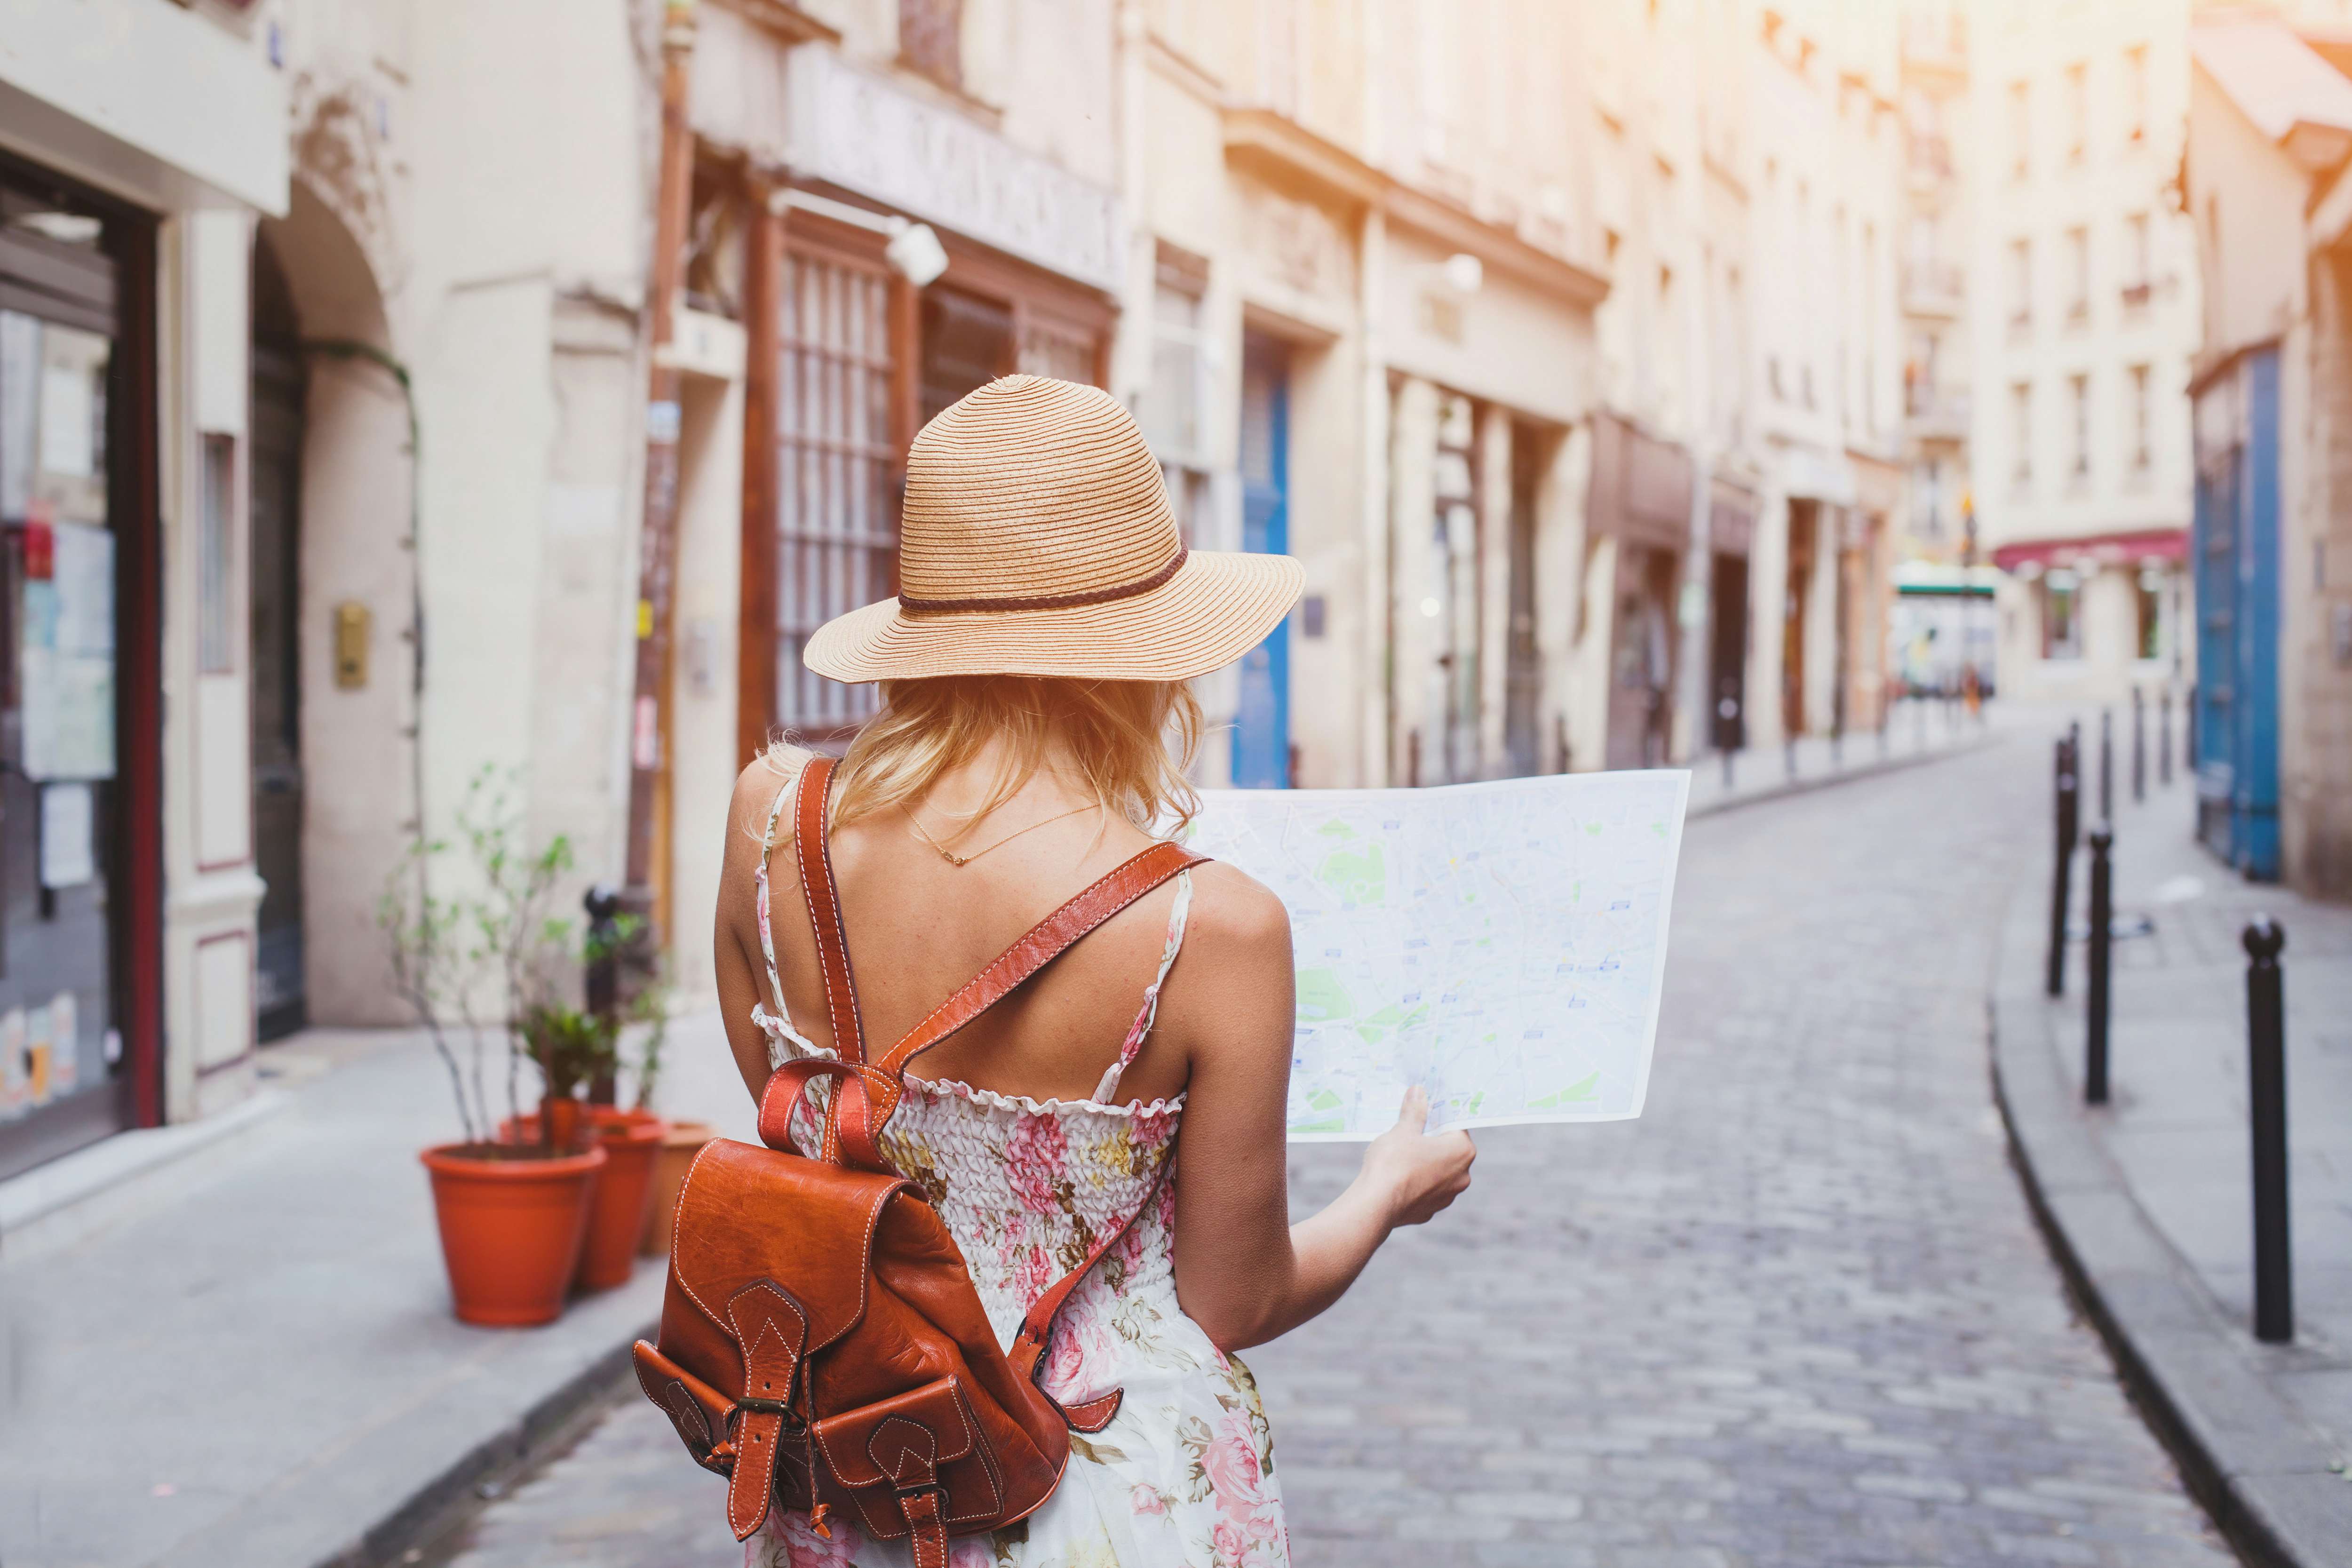 Back view of a woman in a summer dress and hat looking at a map on a quaint European street, symbolizing N&J's luxury European yacht charter services.